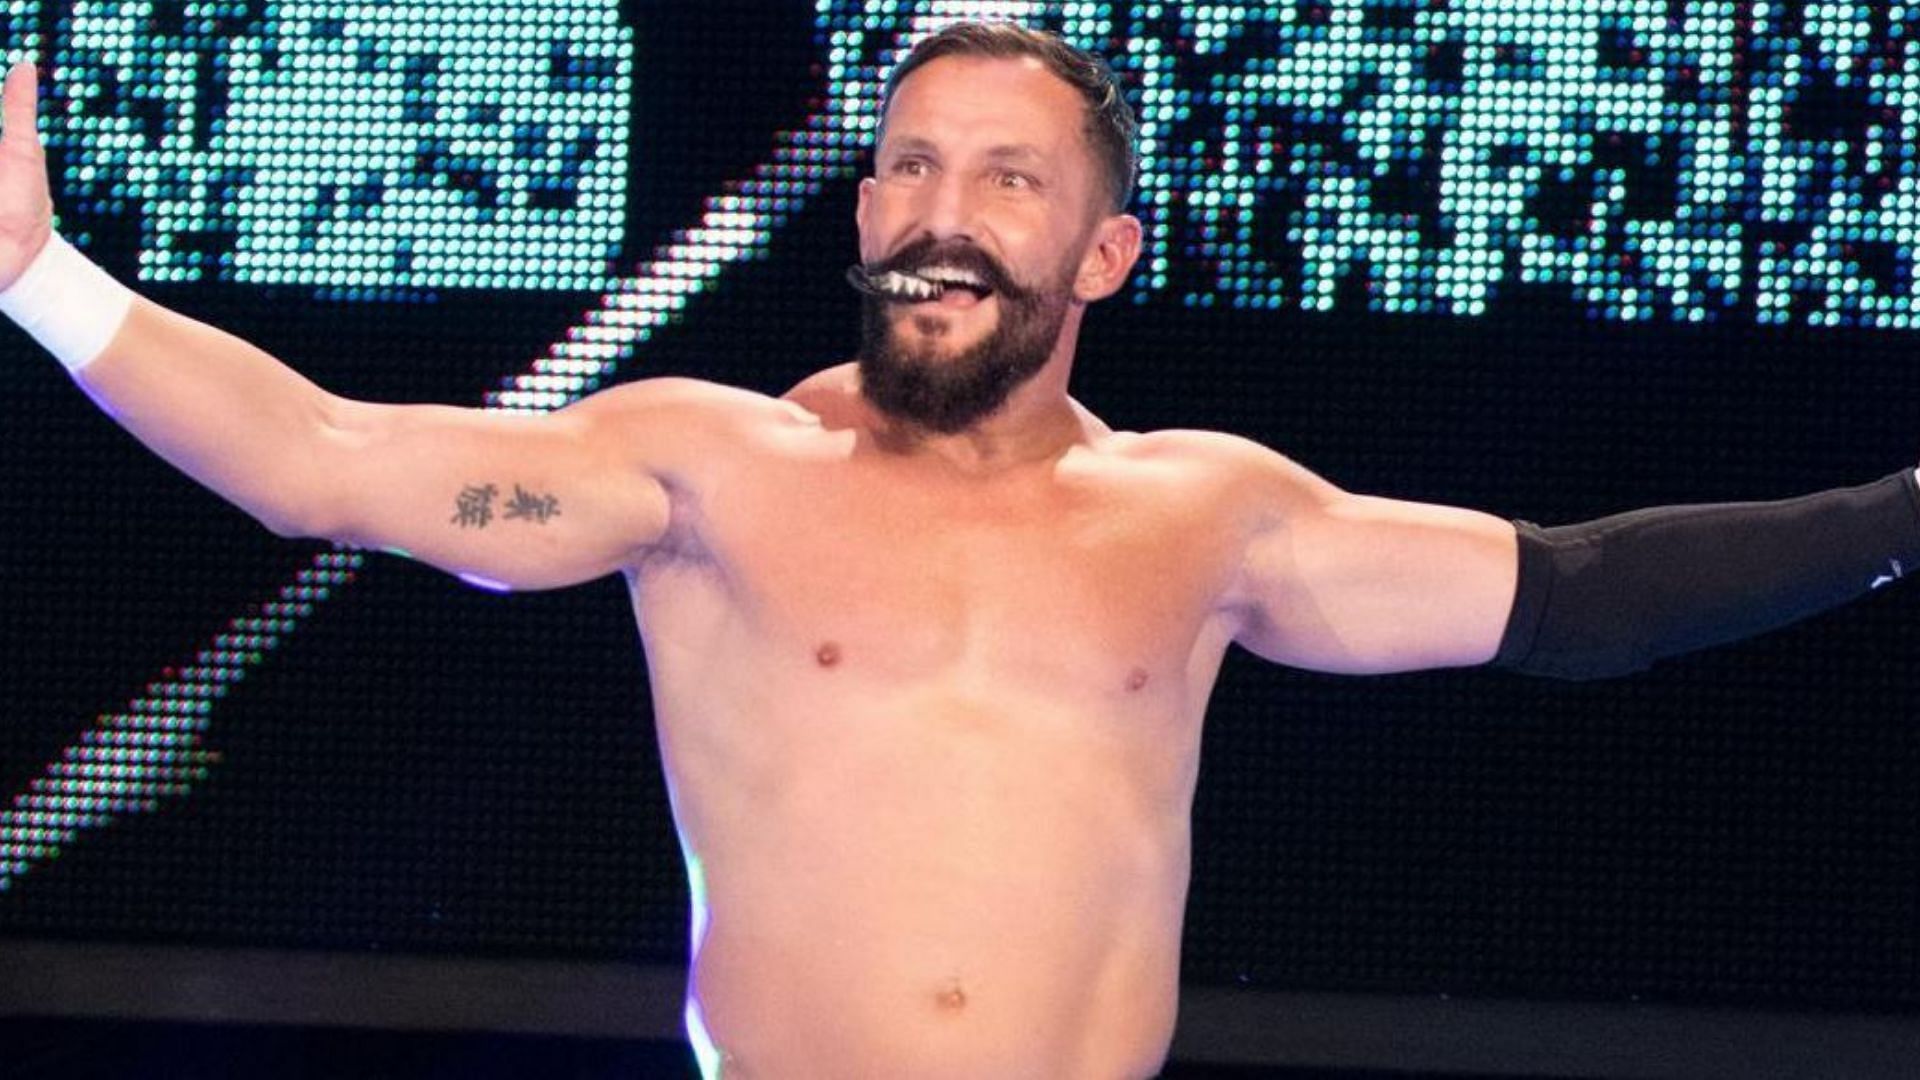 Bobby Fish making his entrance at an NXT event